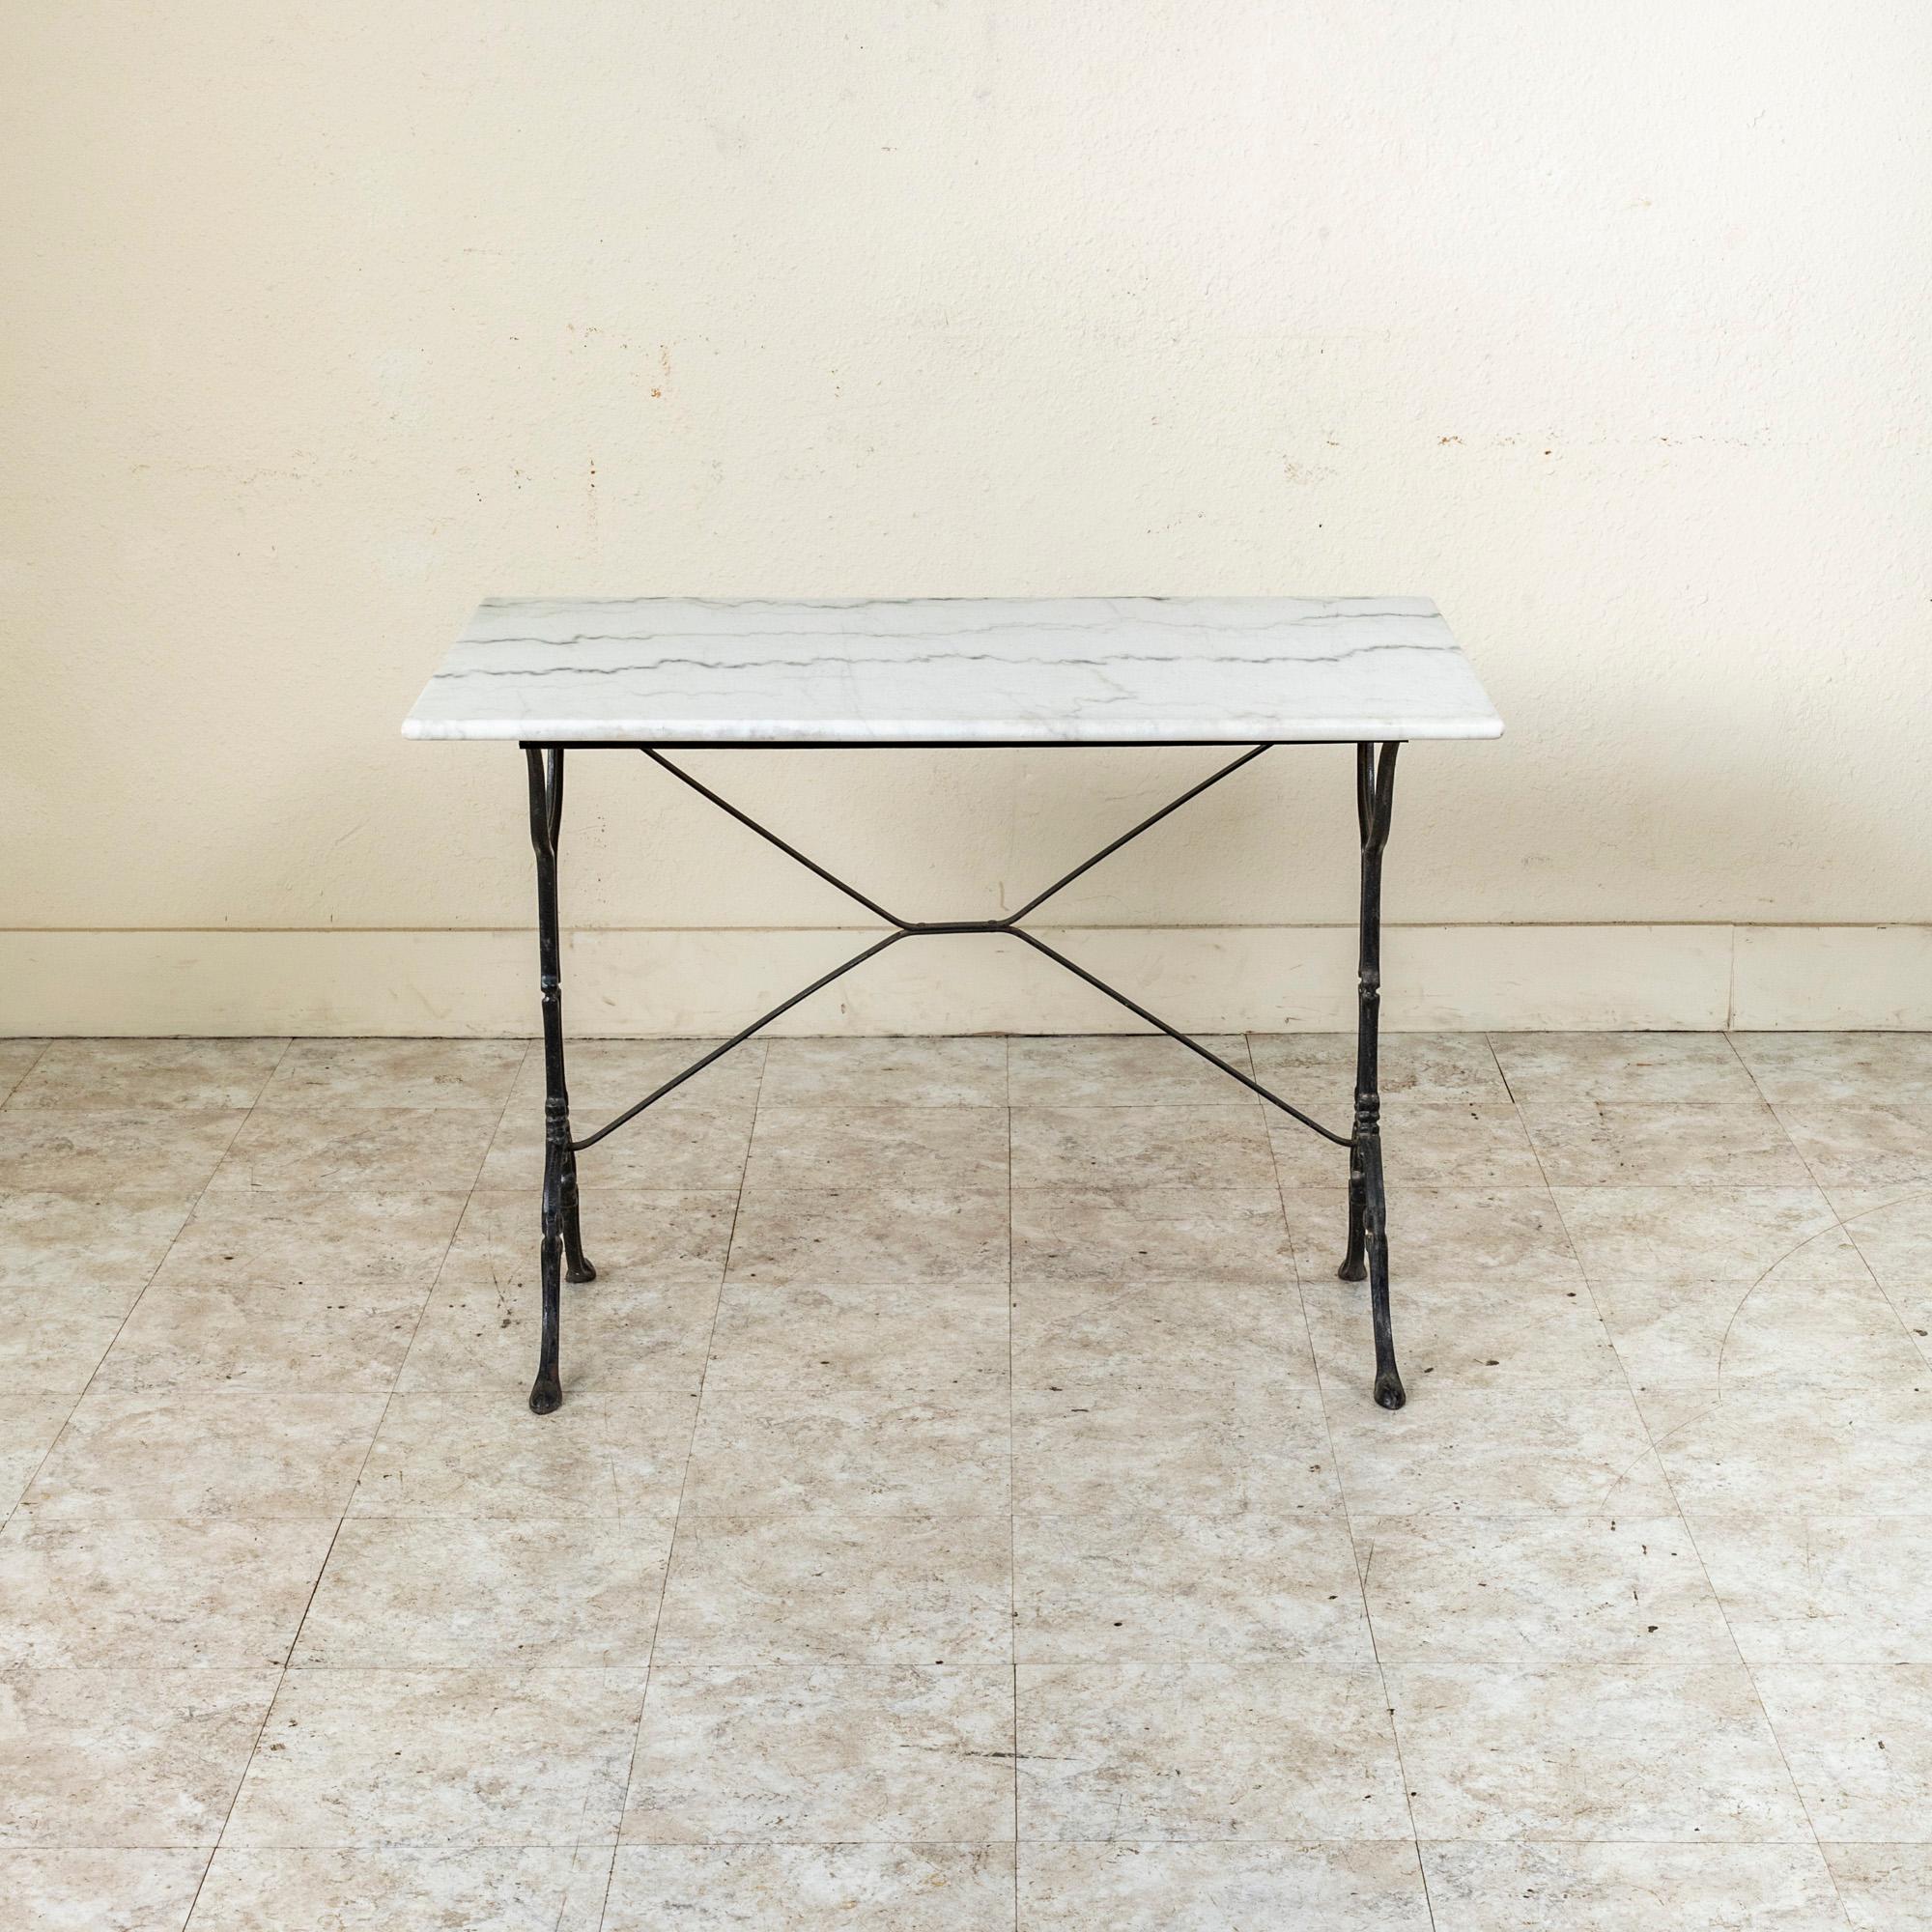 Originally used in a French brasserie during the mid-twentieth century, this cast iron bistro table or cafe table features a solid white marble top with grey veining. Scrolled iron legs support the top and are joined by an X-stretcher that provides